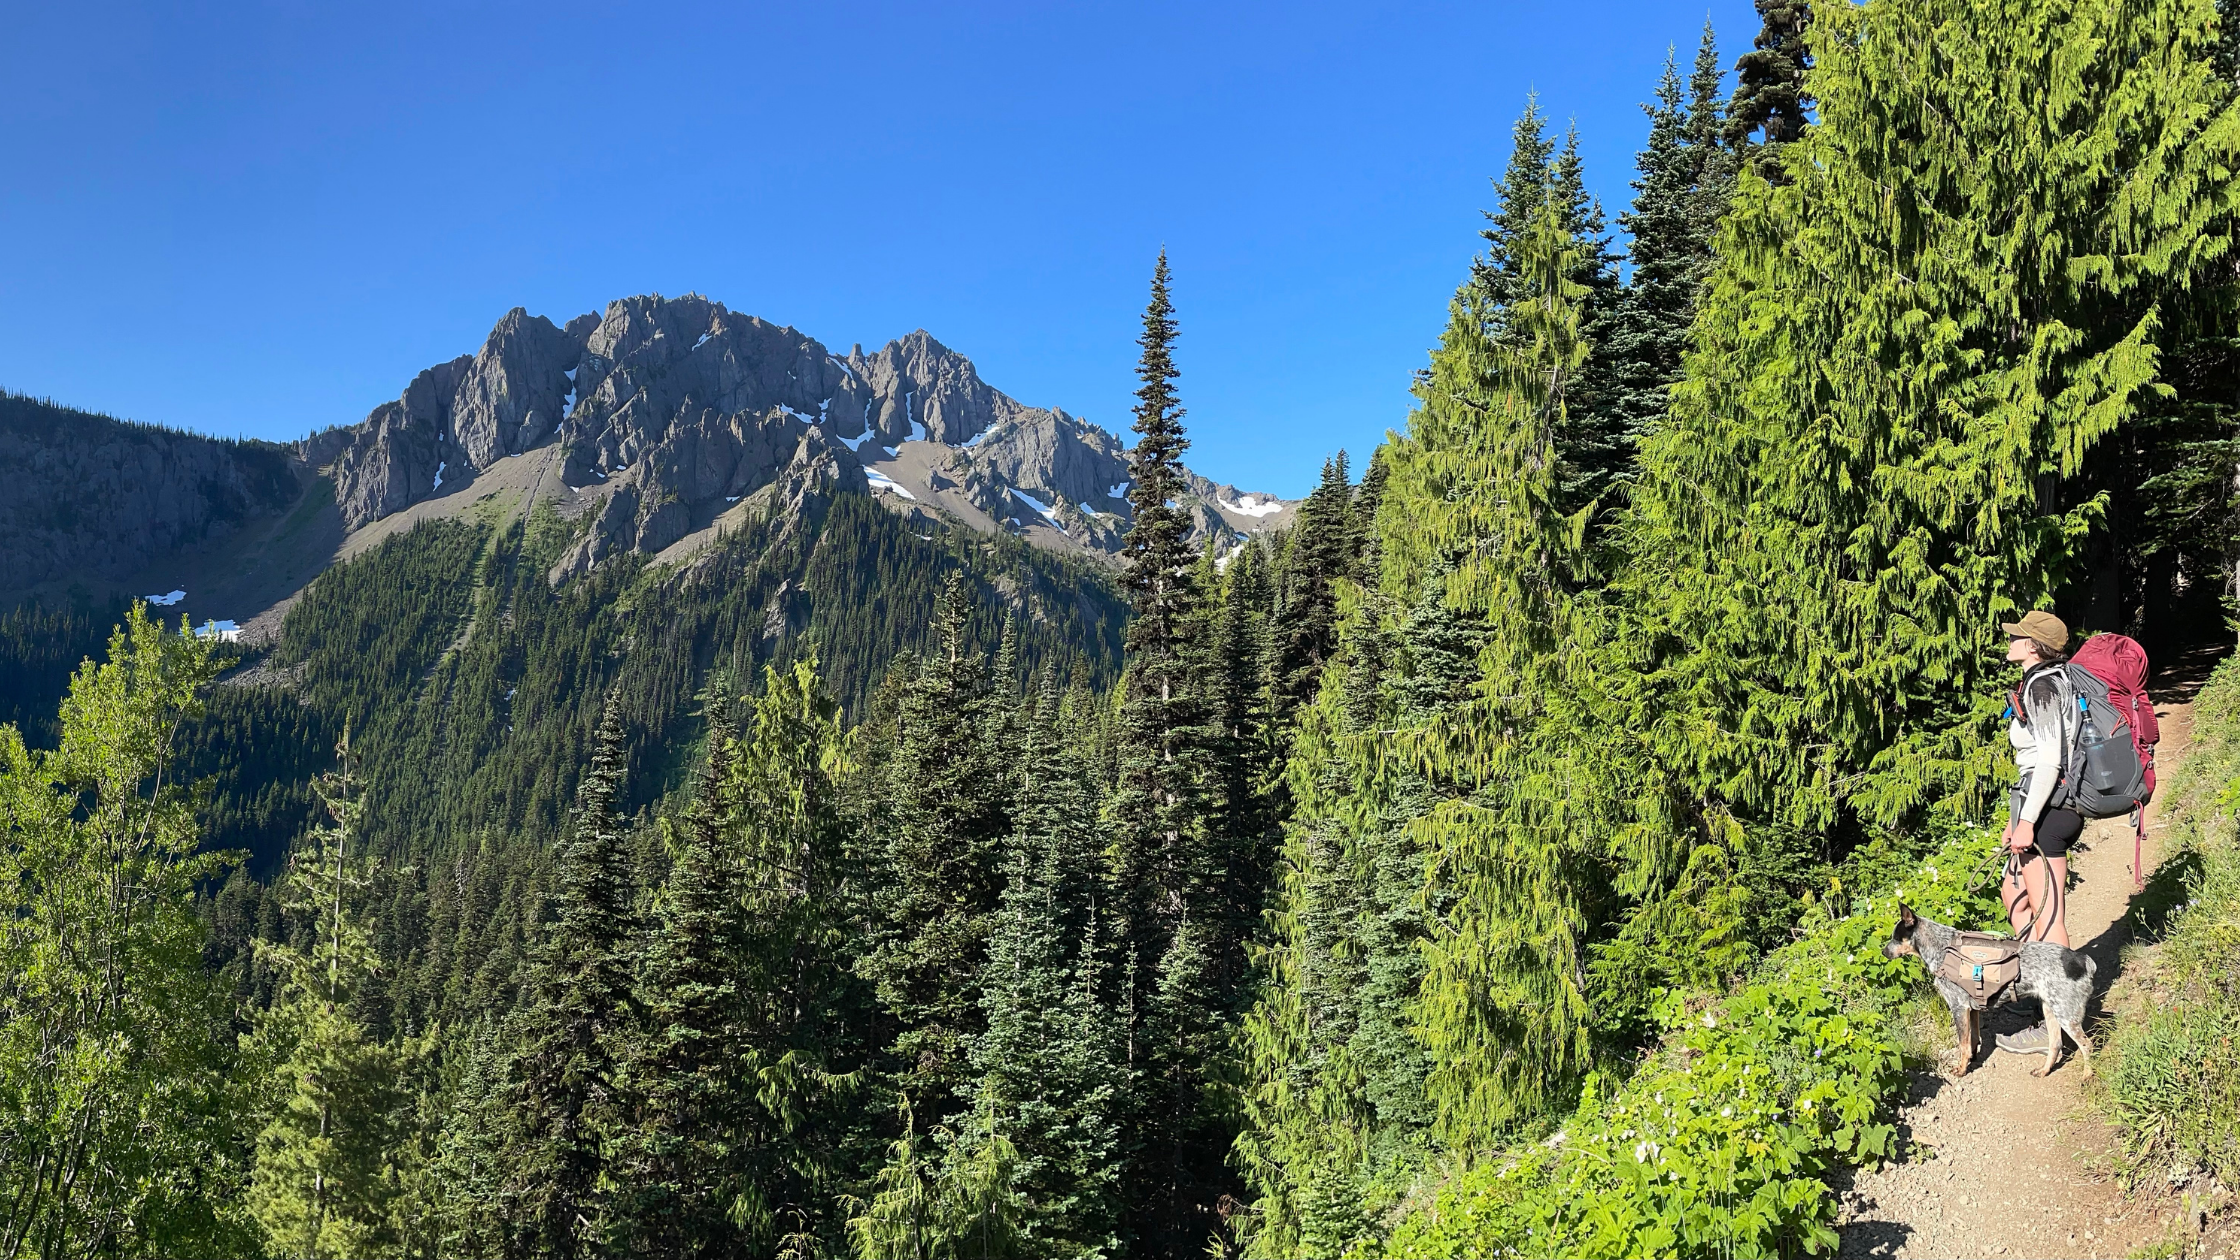 Fess C3 A9e - Backpacking Marmot Pass - Upper Big Quilcene Trail